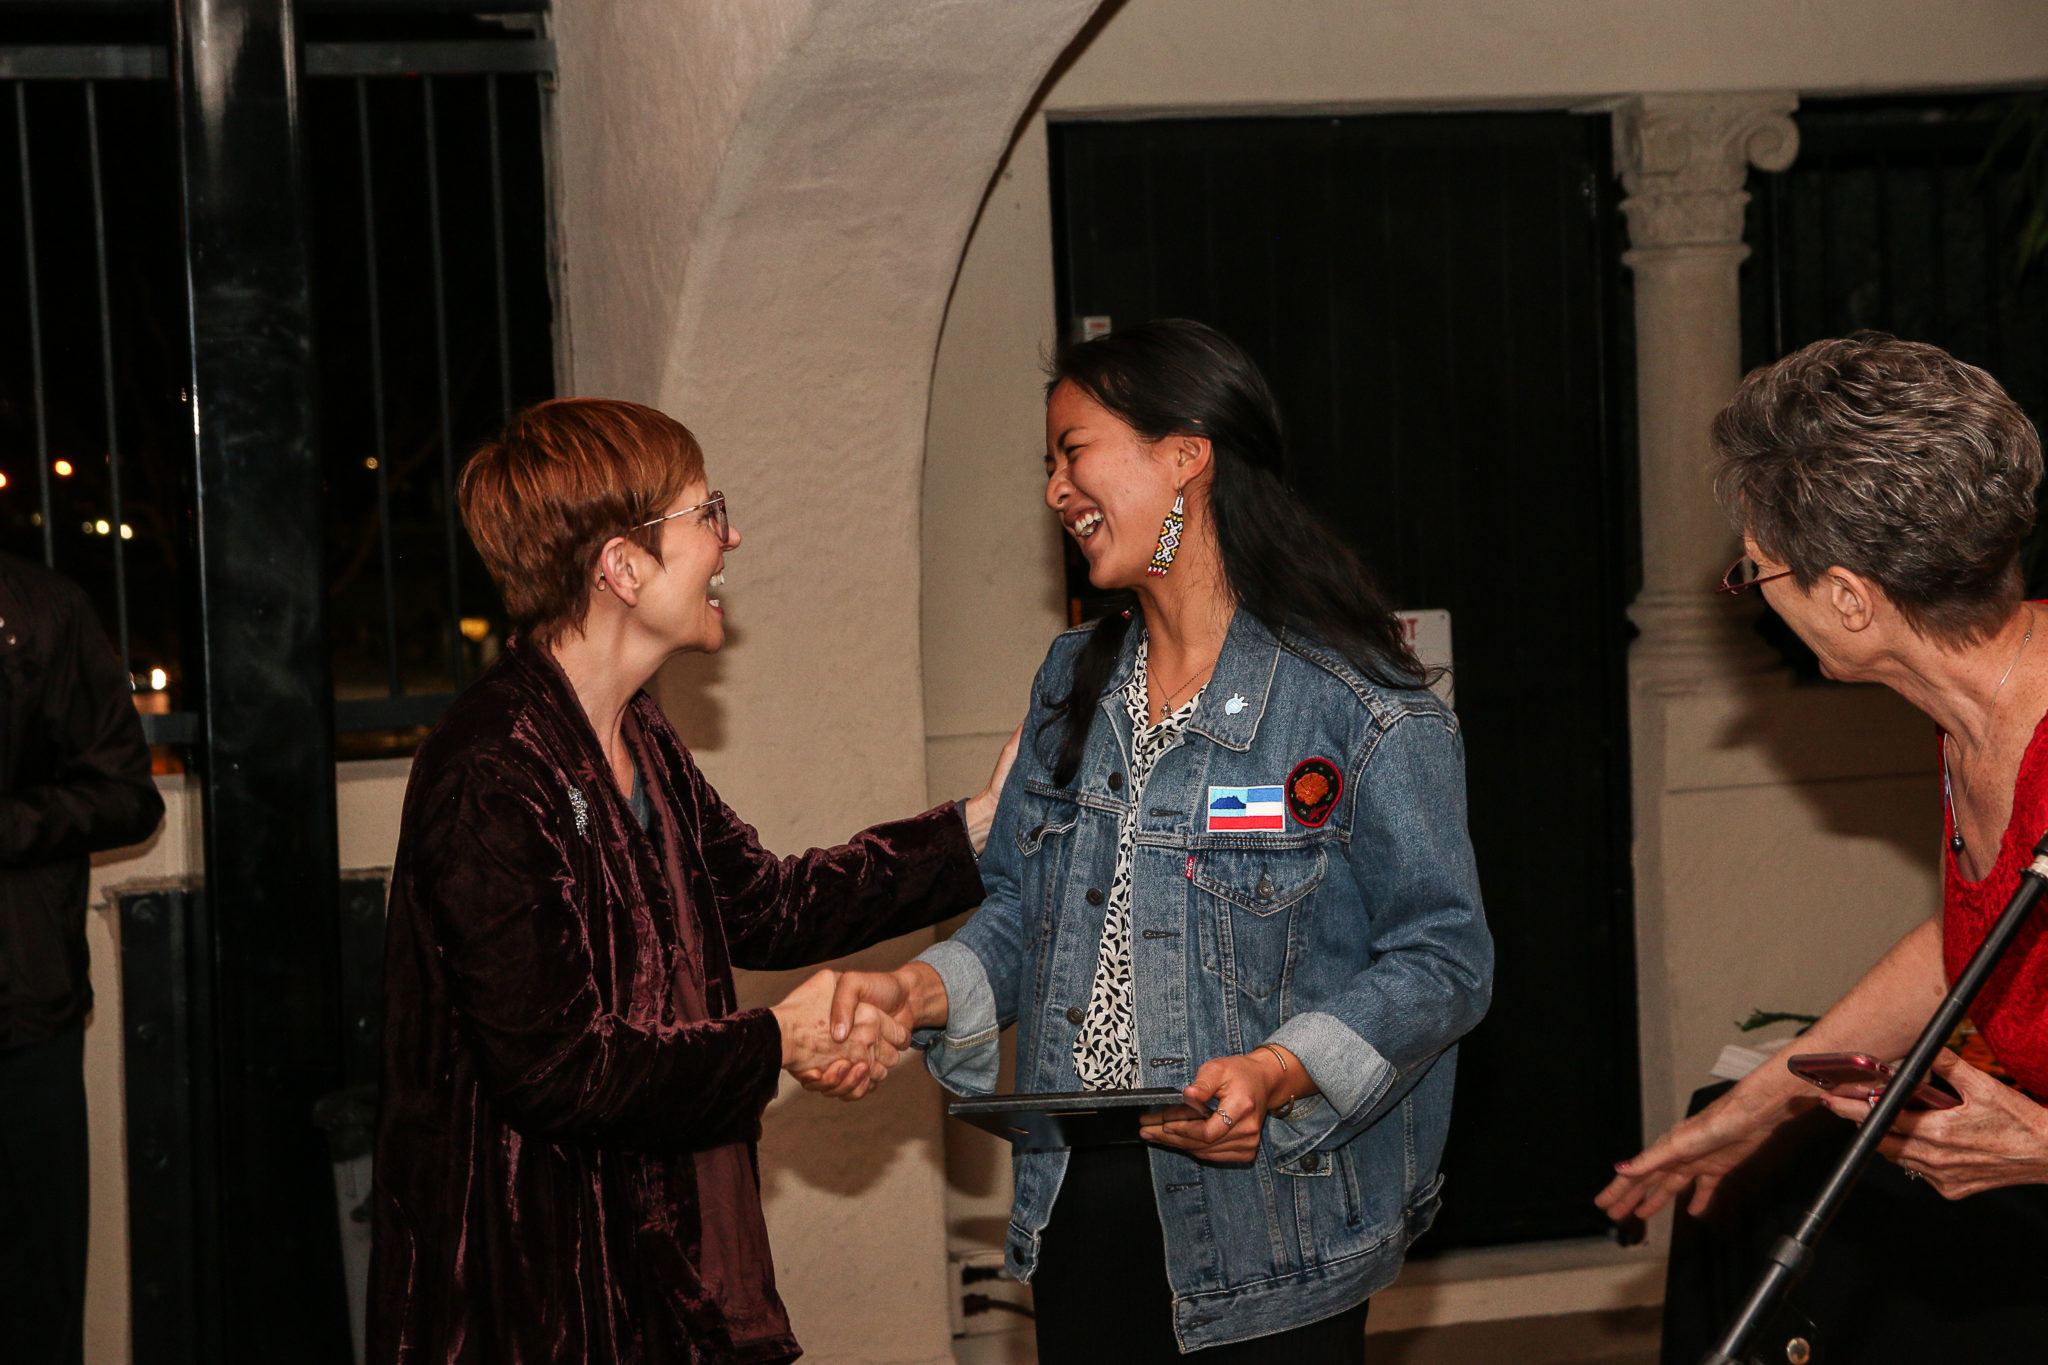 Jaylene Chung receives her award from Dr. Fehr the Young Alumni Rooftop Reunion 2020